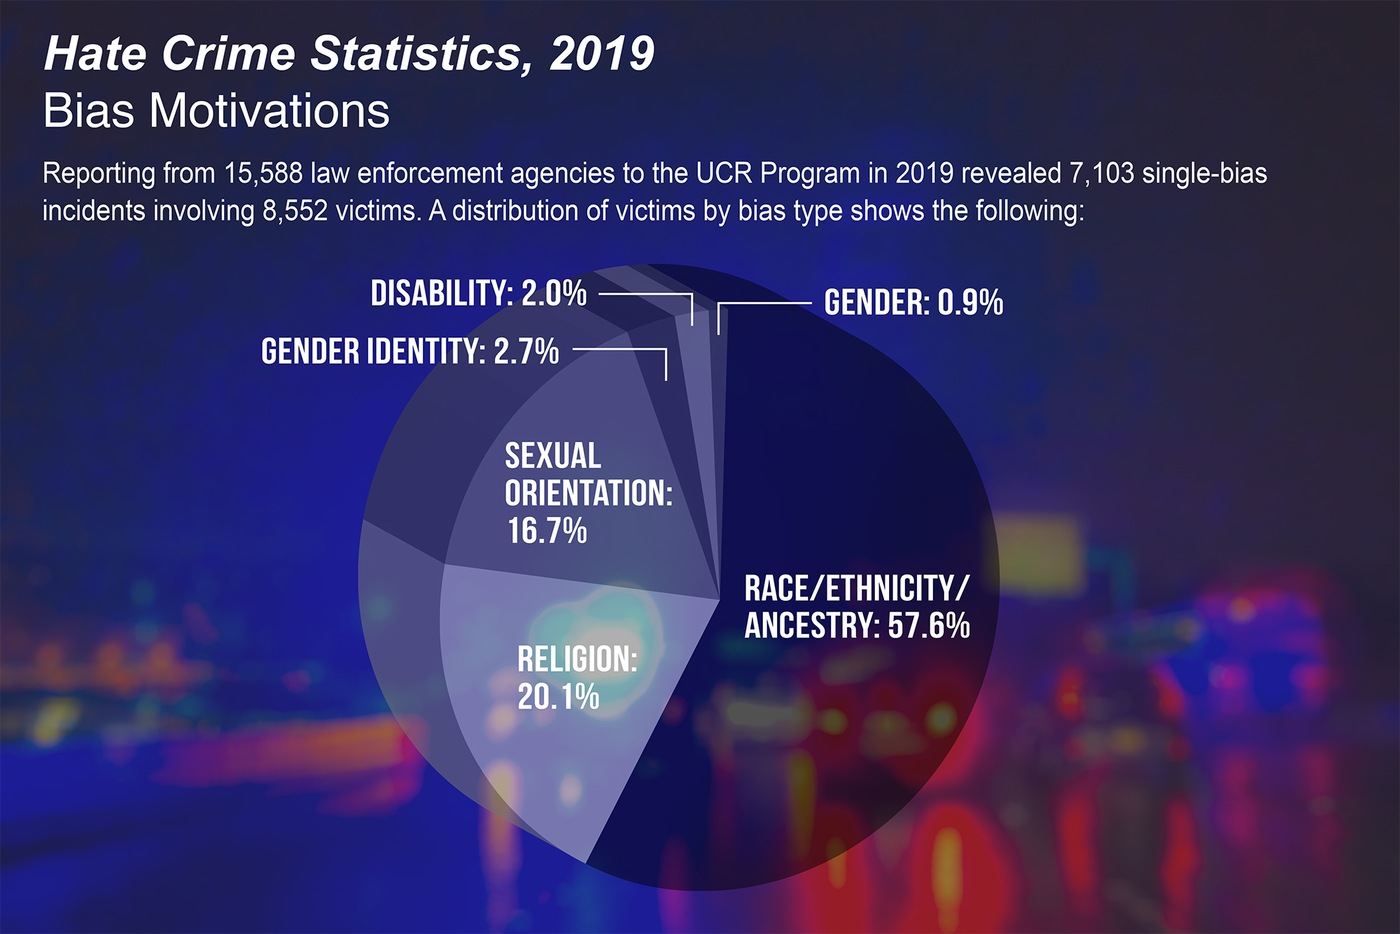 Washington, D.C.
<br />FBI National Press Office
<br />(202) 324-3691
<br />Share on Twitter Twitter Share on Facebook Facebook Email Email
<br />
<br />November 16, 2020
<br />FBI Releases 2019 Hate Crime Statistics
<br />Today the FBI released Hate Crime Statistics, 2019, the Uniform Crime Reporting (UCR) Program’s latest compilation about bias-motivated incidents throughout the nation. The 2019 data, submitted by 15,588 law enforcement agencies, provide information about the offenses, victims, offenders, and locations of hate crimes.
<br />
<br />Law enforcement agencies submitted incident reports involving 7,314 criminal incidents and 8,559 related offenses as being motivated by bias toward race, ethnicity, ancestry, religion, sexual orientation, disability, gender, and gender identity. Please note the UCR Program does not estimate offenses for the jurisdictions of agencies that do not submit reports. Highlights of Hate Crime Statistics, 2019 follow. (Due to rounding, percentage breakdowns may not add to 100%.)